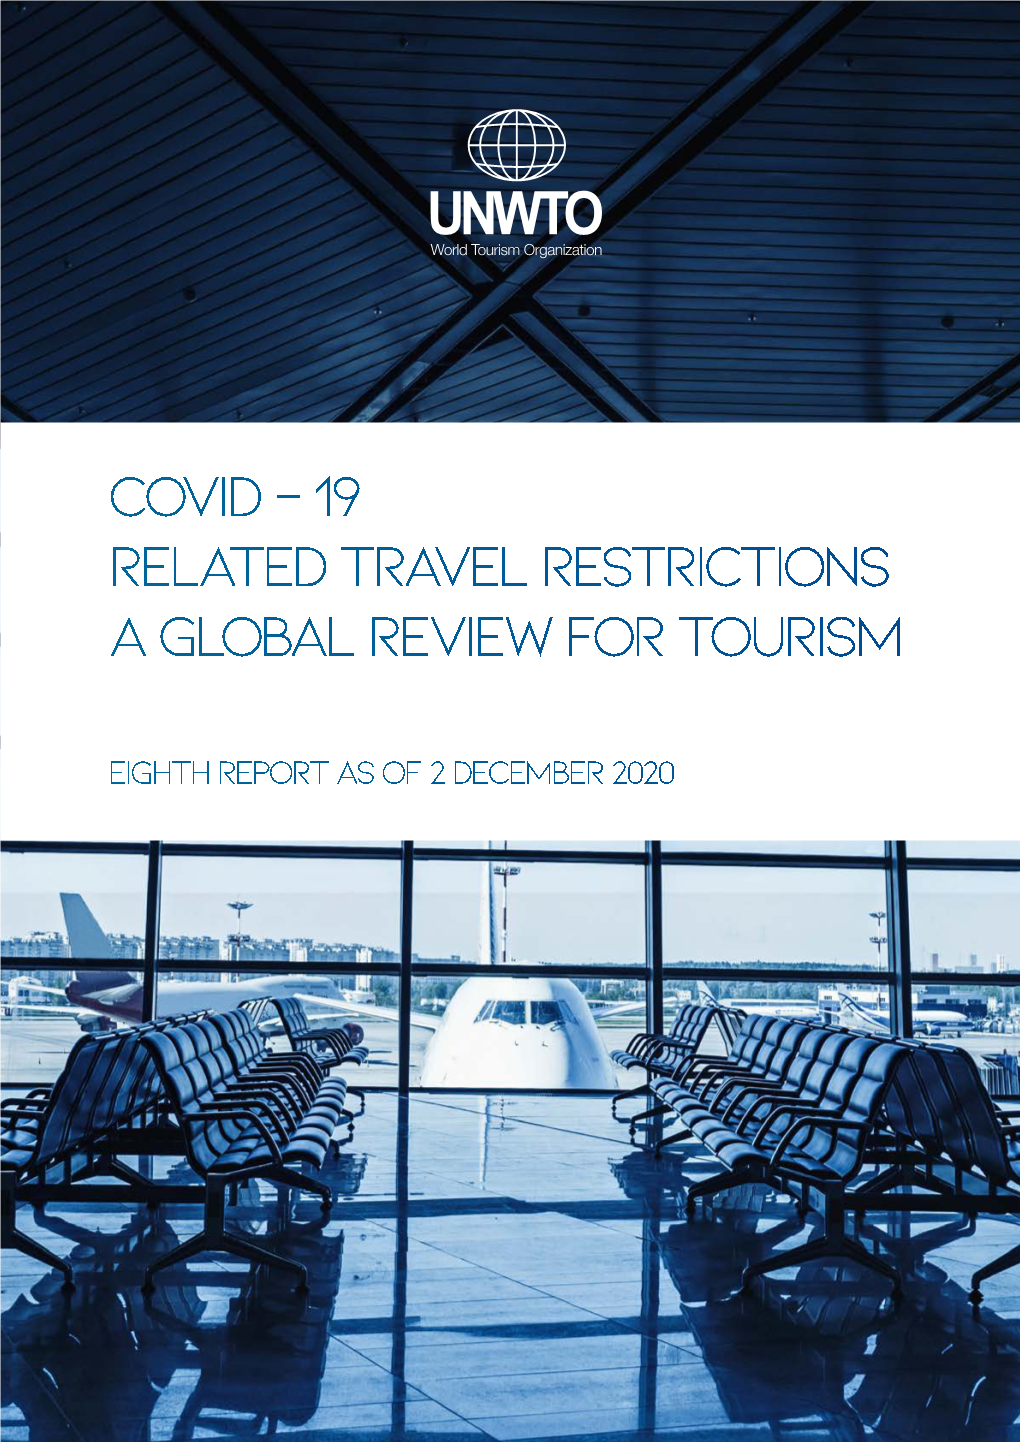 19 Related Travel Restrictions – a Global Review for Tourism